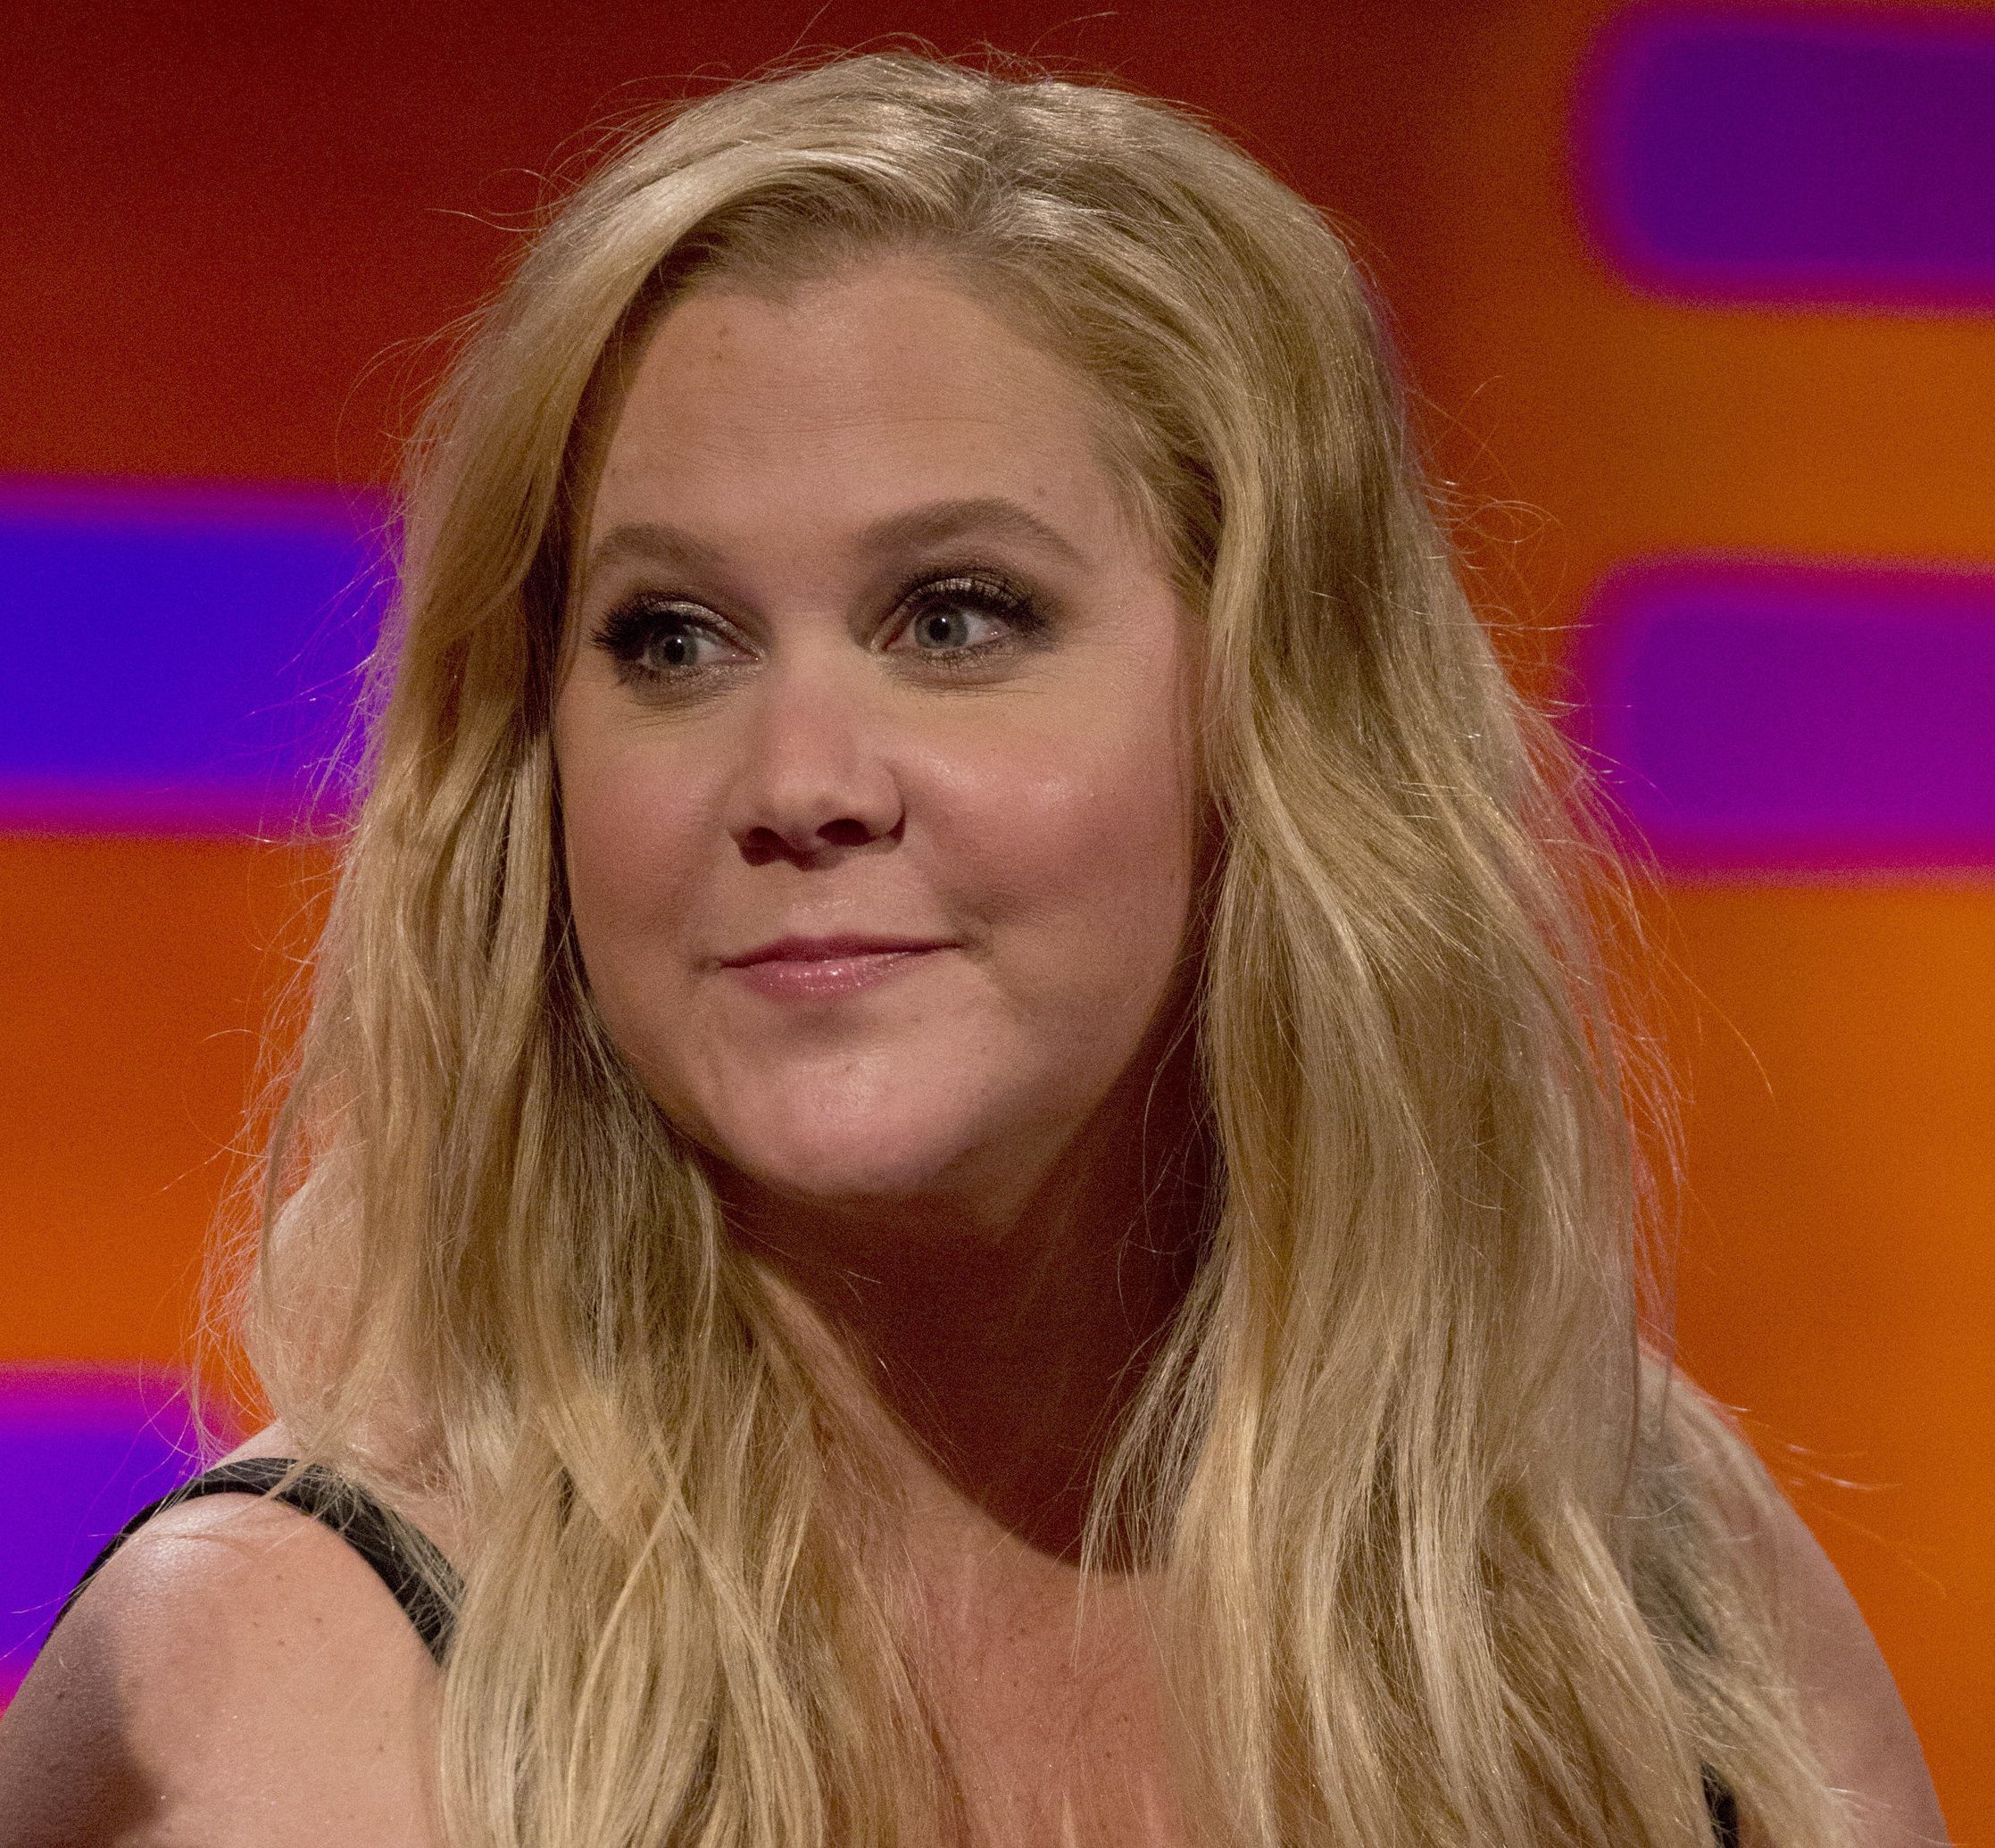 Amy Schumer during the filming of the Graham Norton Show (PA Images on behalf of So TV)